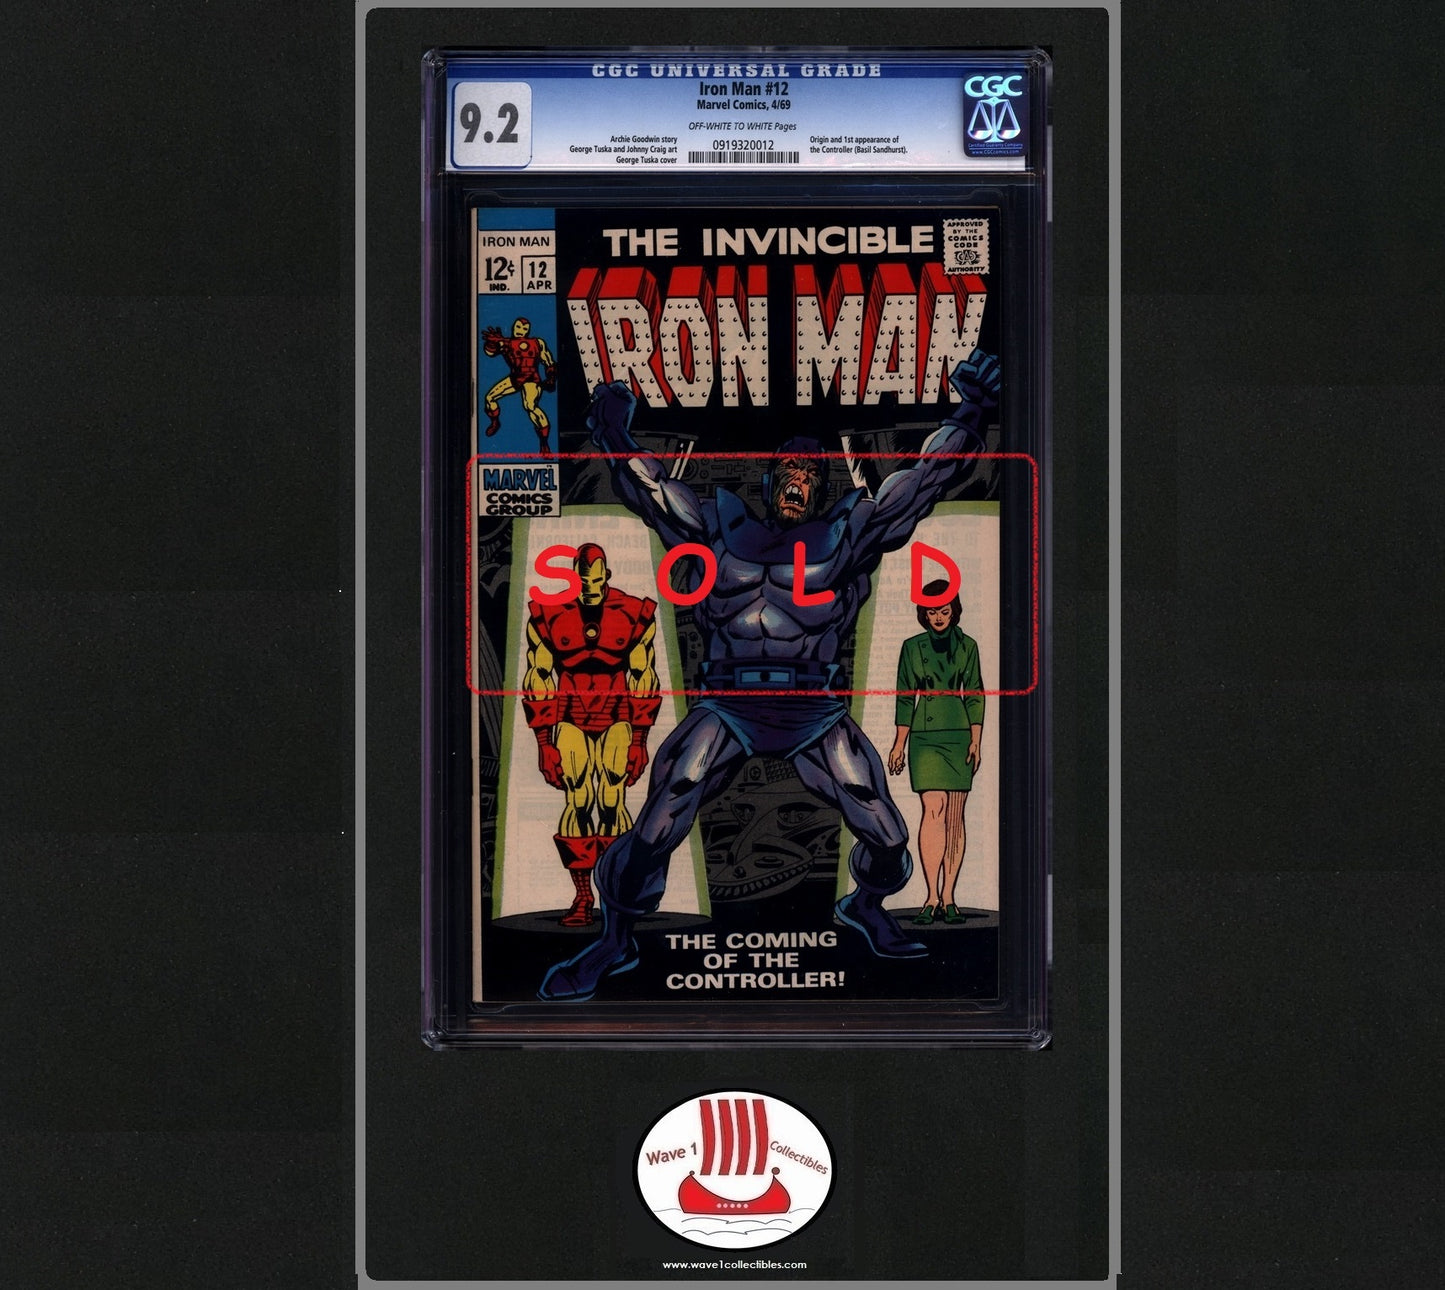 Iron Man vol 1 #12 CGC 9.2 | Marvel Comics 1st appearance of the Controller